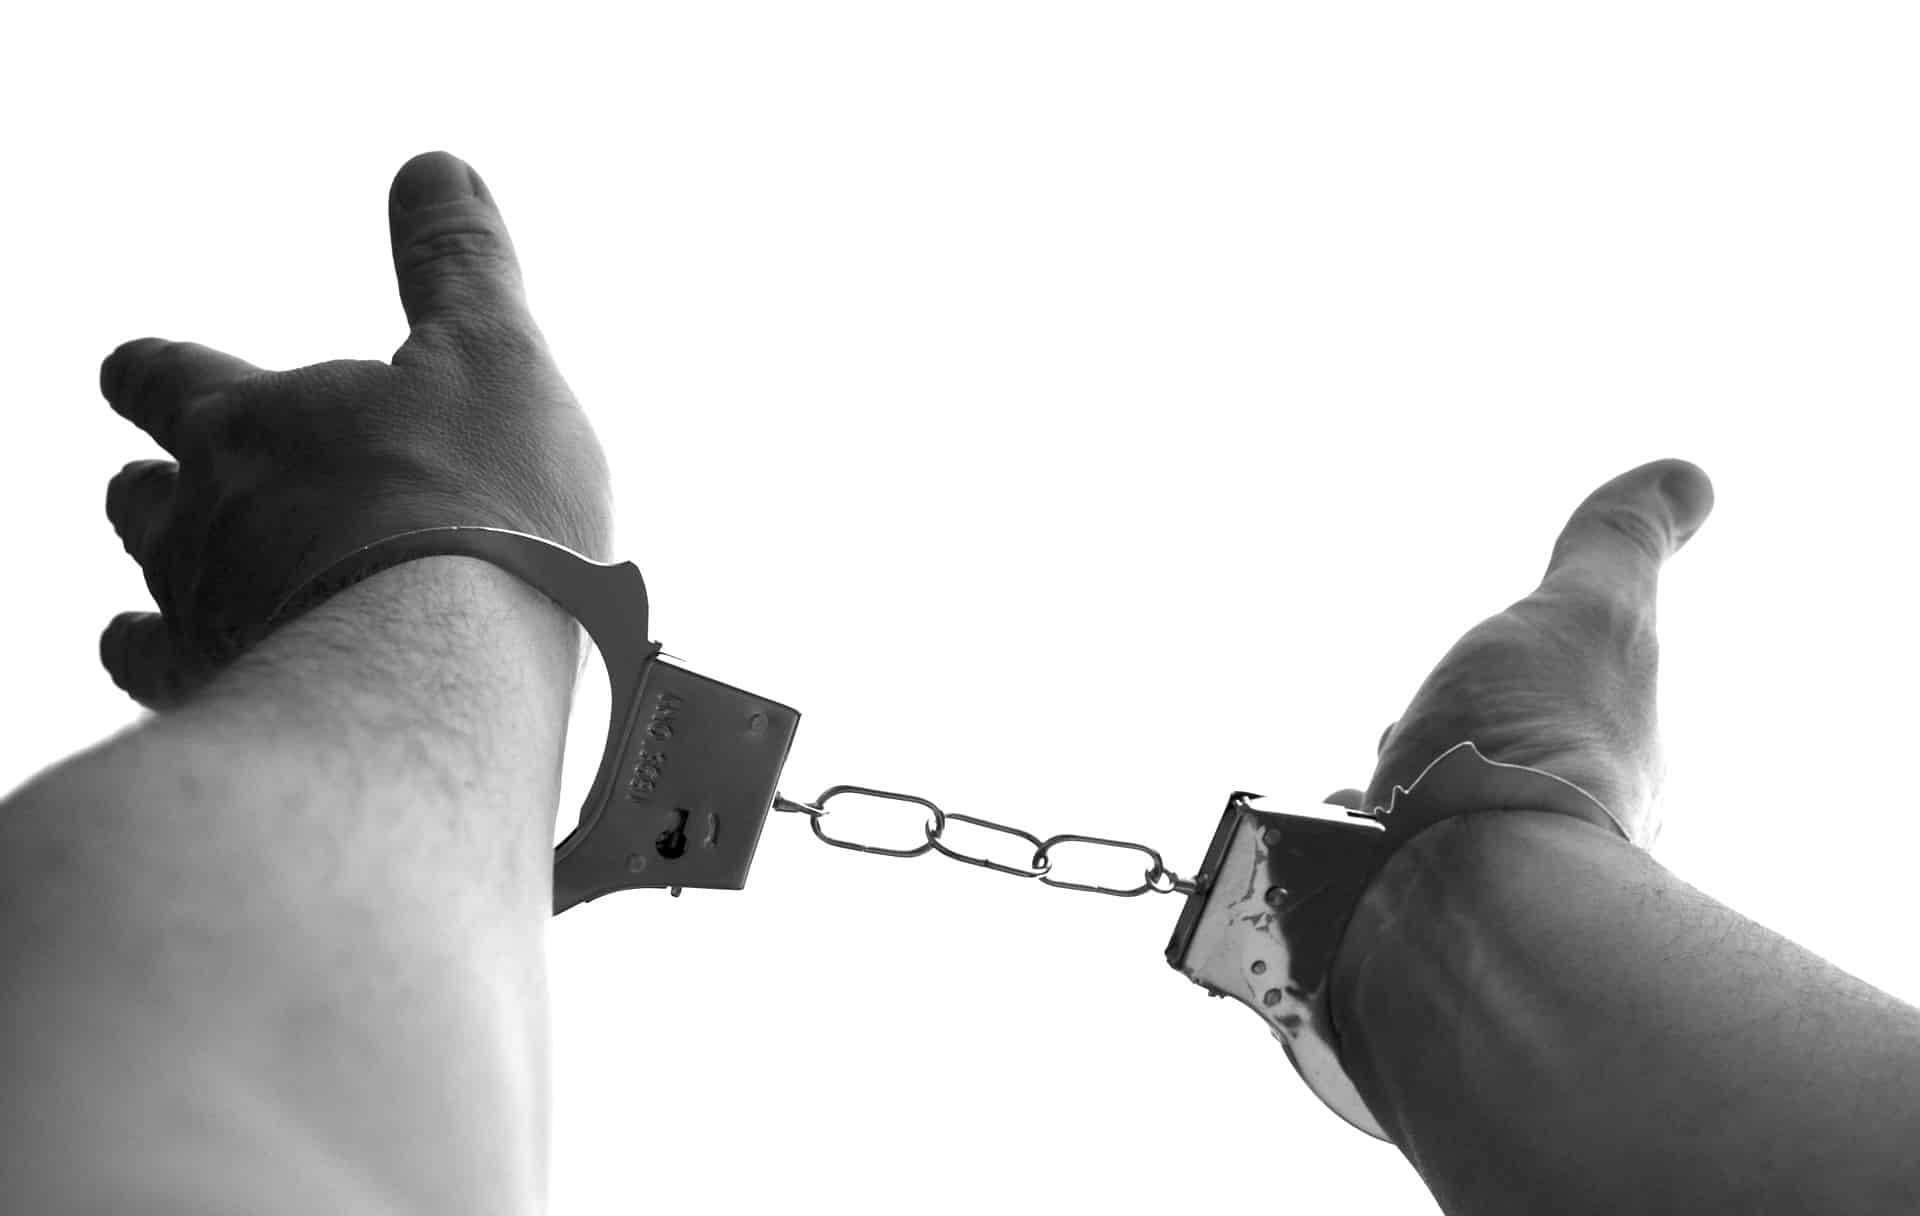 Two hands reach out in handcuffs